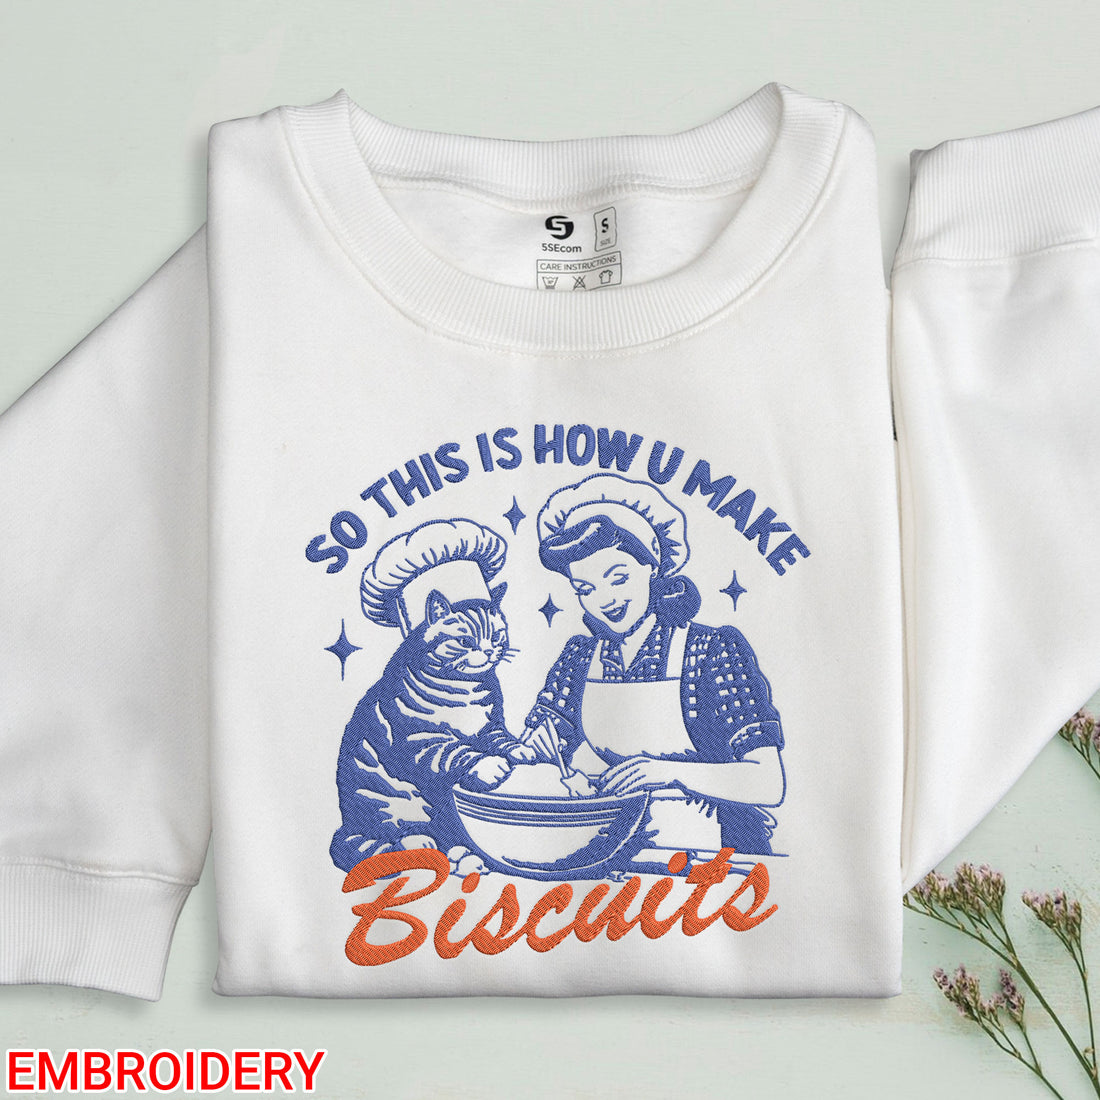 So This Is How You Make Biscuits Embroidered Sweatshirt, Cat Biscuits Shirt, Funny Cat Shirts, Funny Meme Sweatshirt, Vintage Baking Shirt, Embroidered Cewneck Sweatshirt